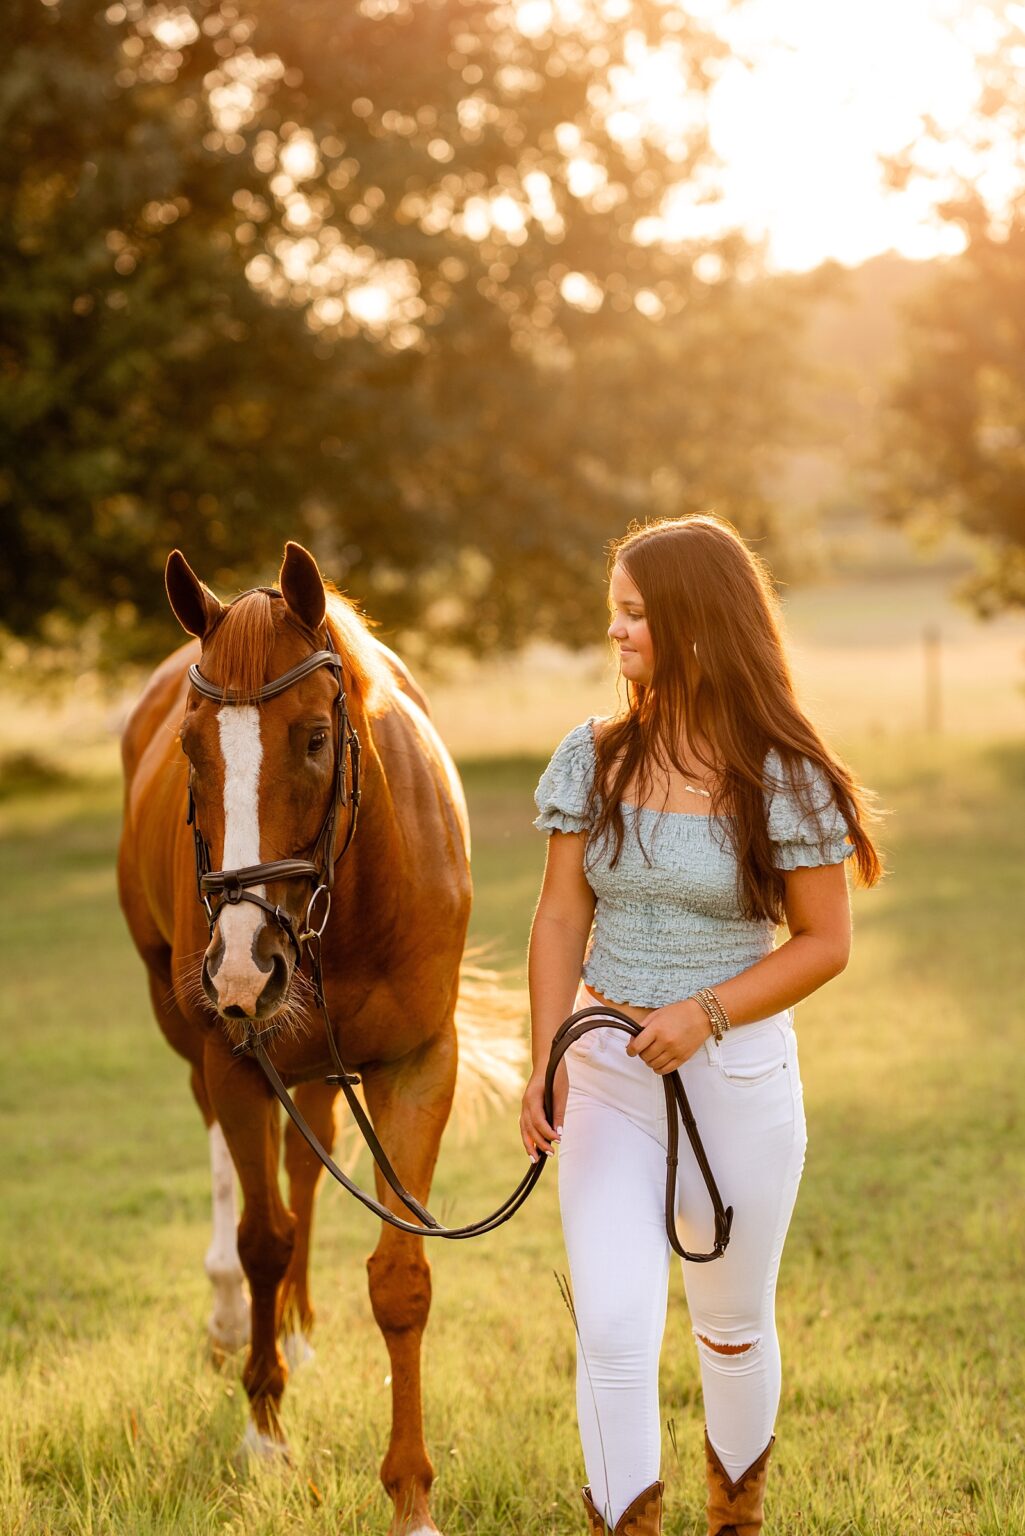 Equine photographer near Tuscaloosa, Alabama takes horse and rider portraits of girl in white dress with her Thoroughbred who compete with the Alabama Eventing Team.